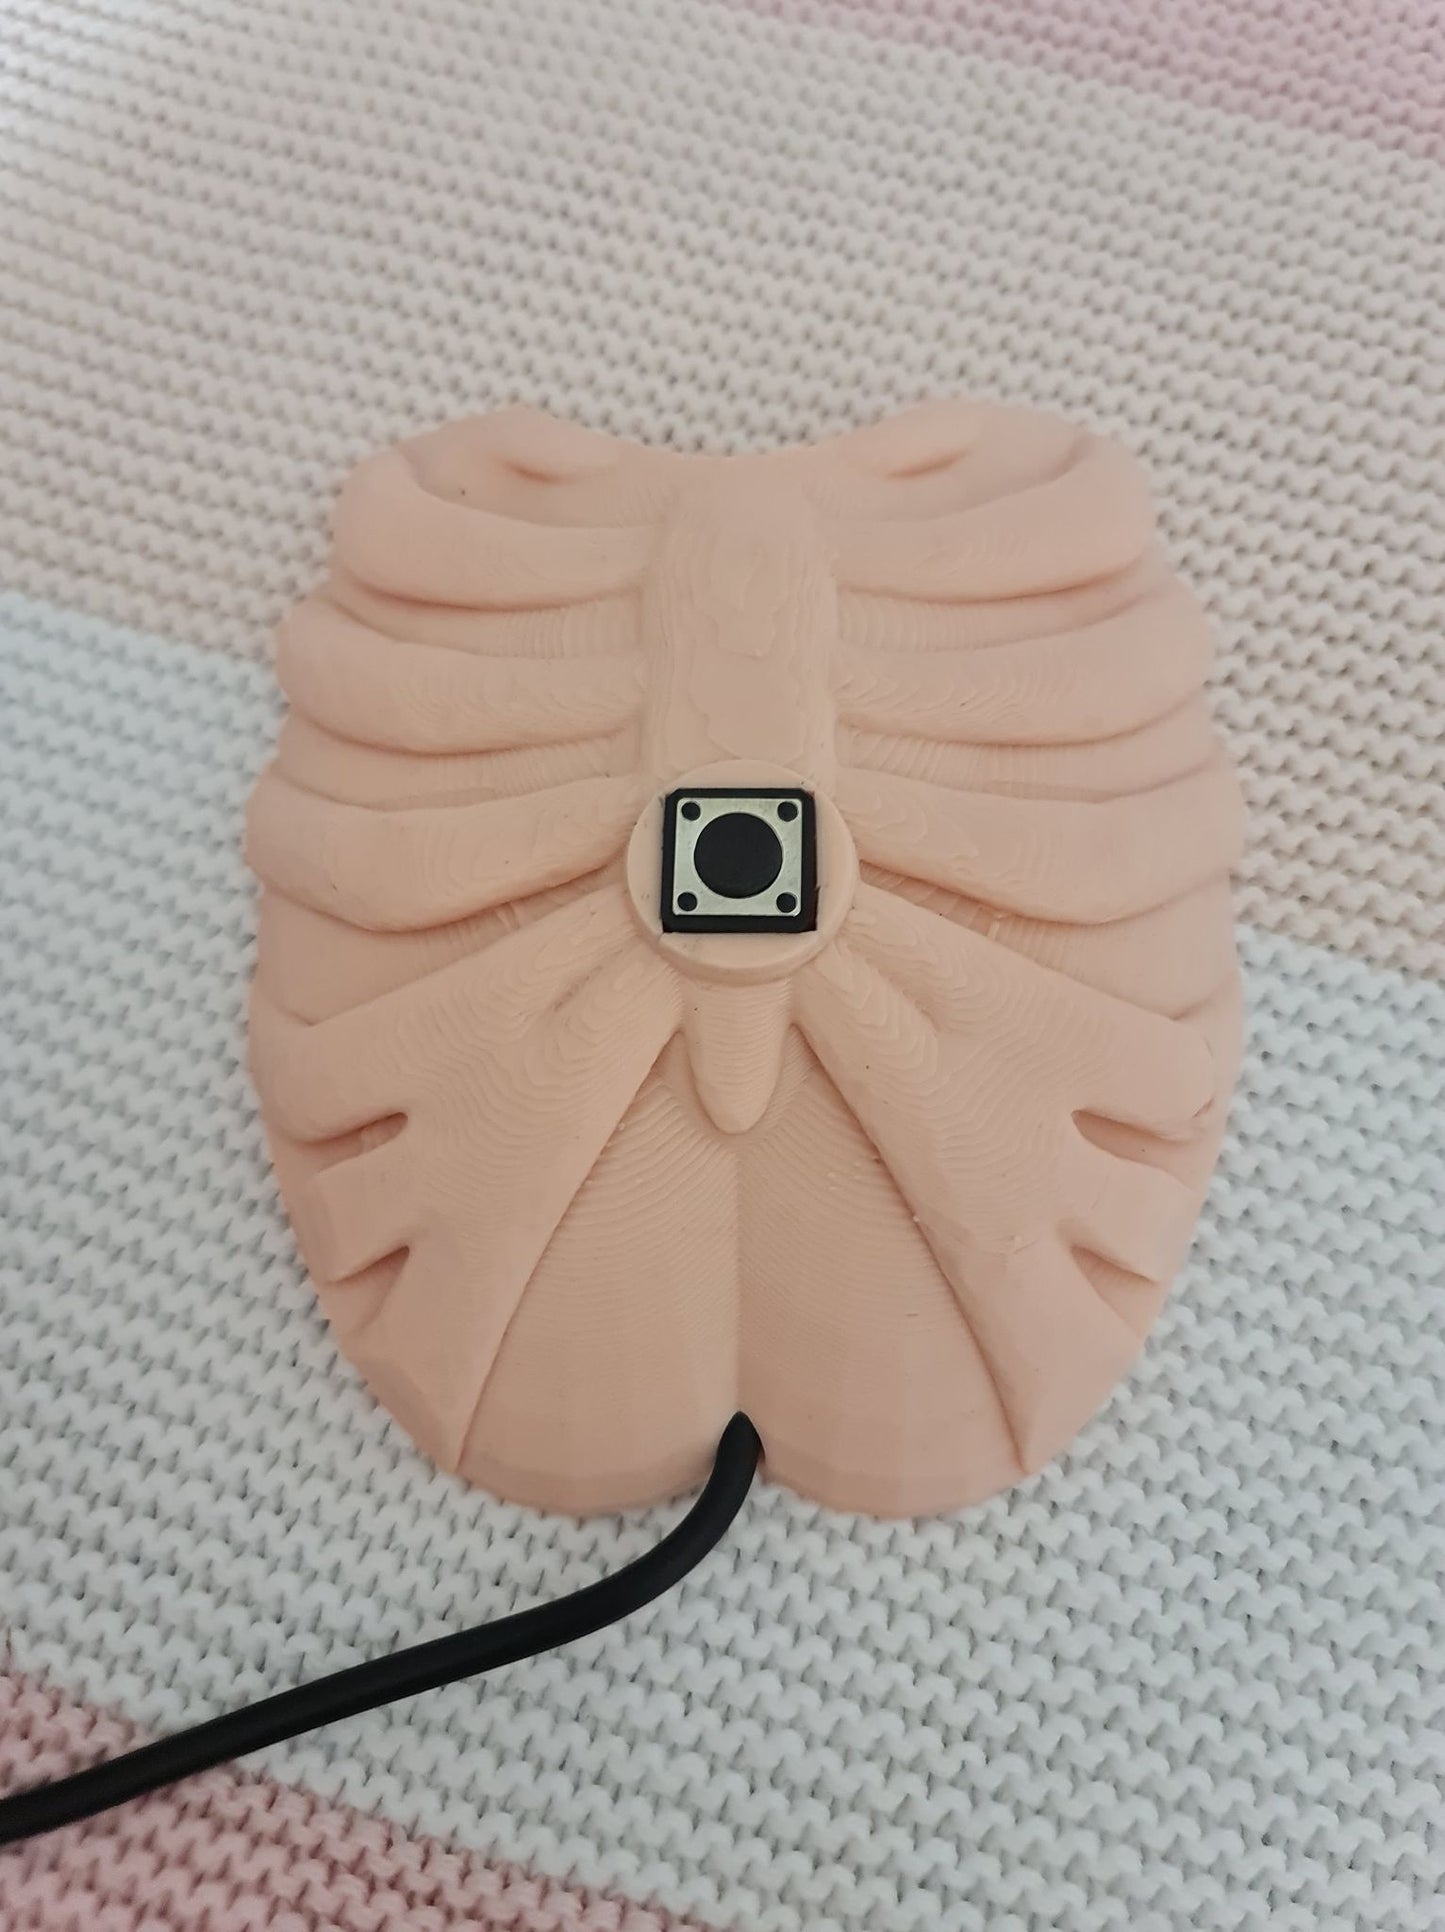 Toddler Reborn Baby Doll Beating Heart Chest Plate Rechargeable